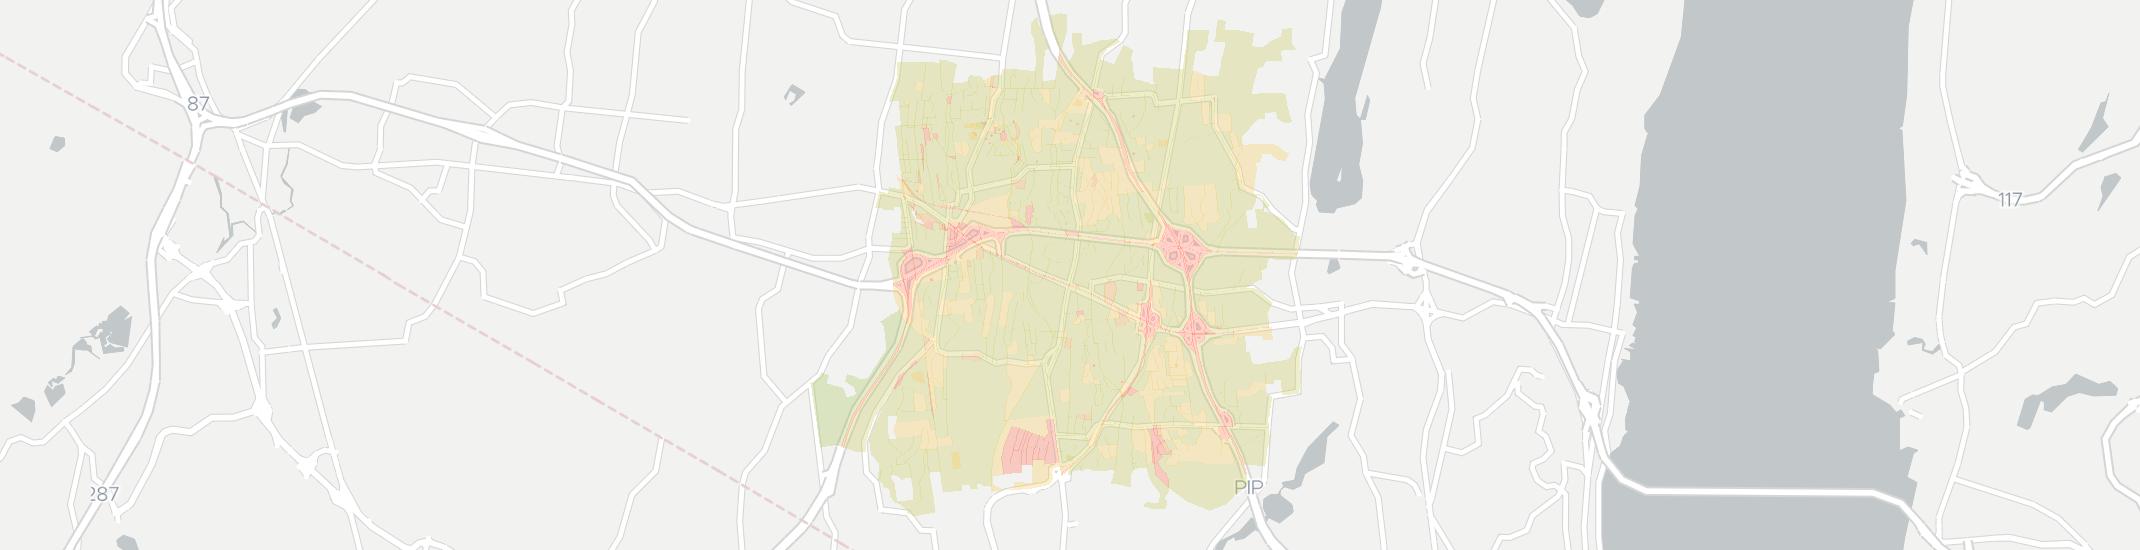 Nanuet Internet Competition Map. Click for interactive map.